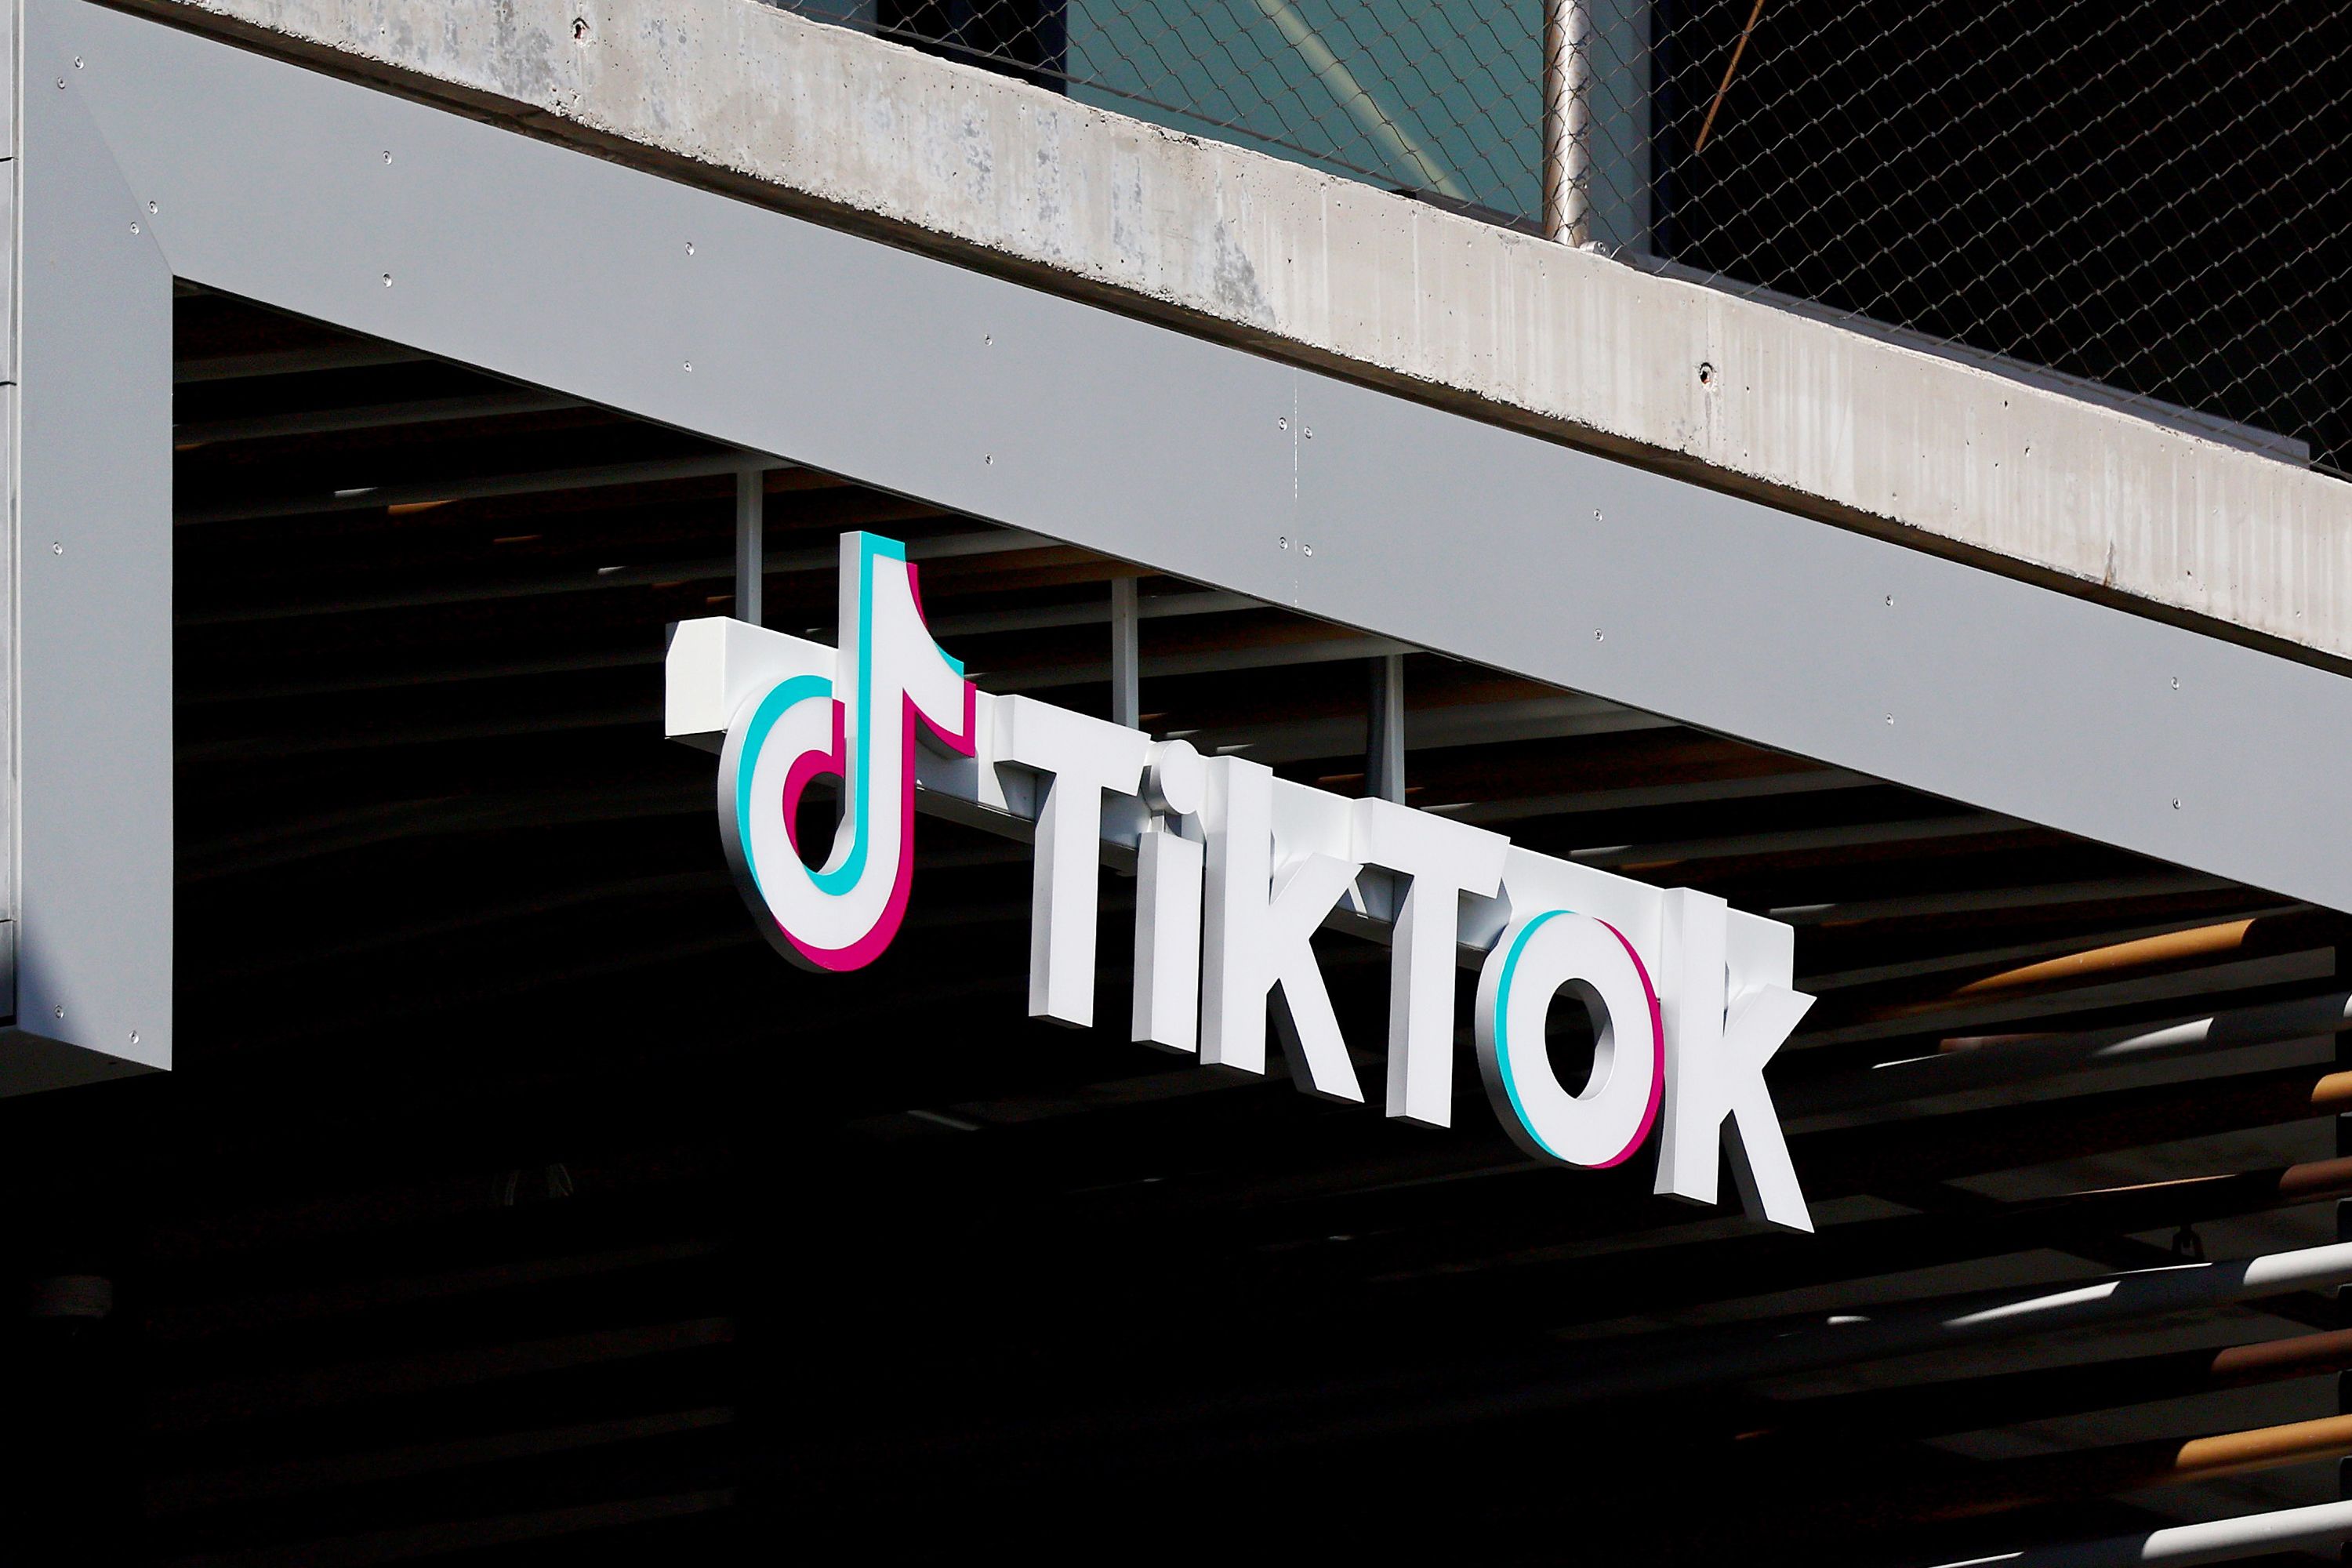 China-owned TikTok denies it could use location information to